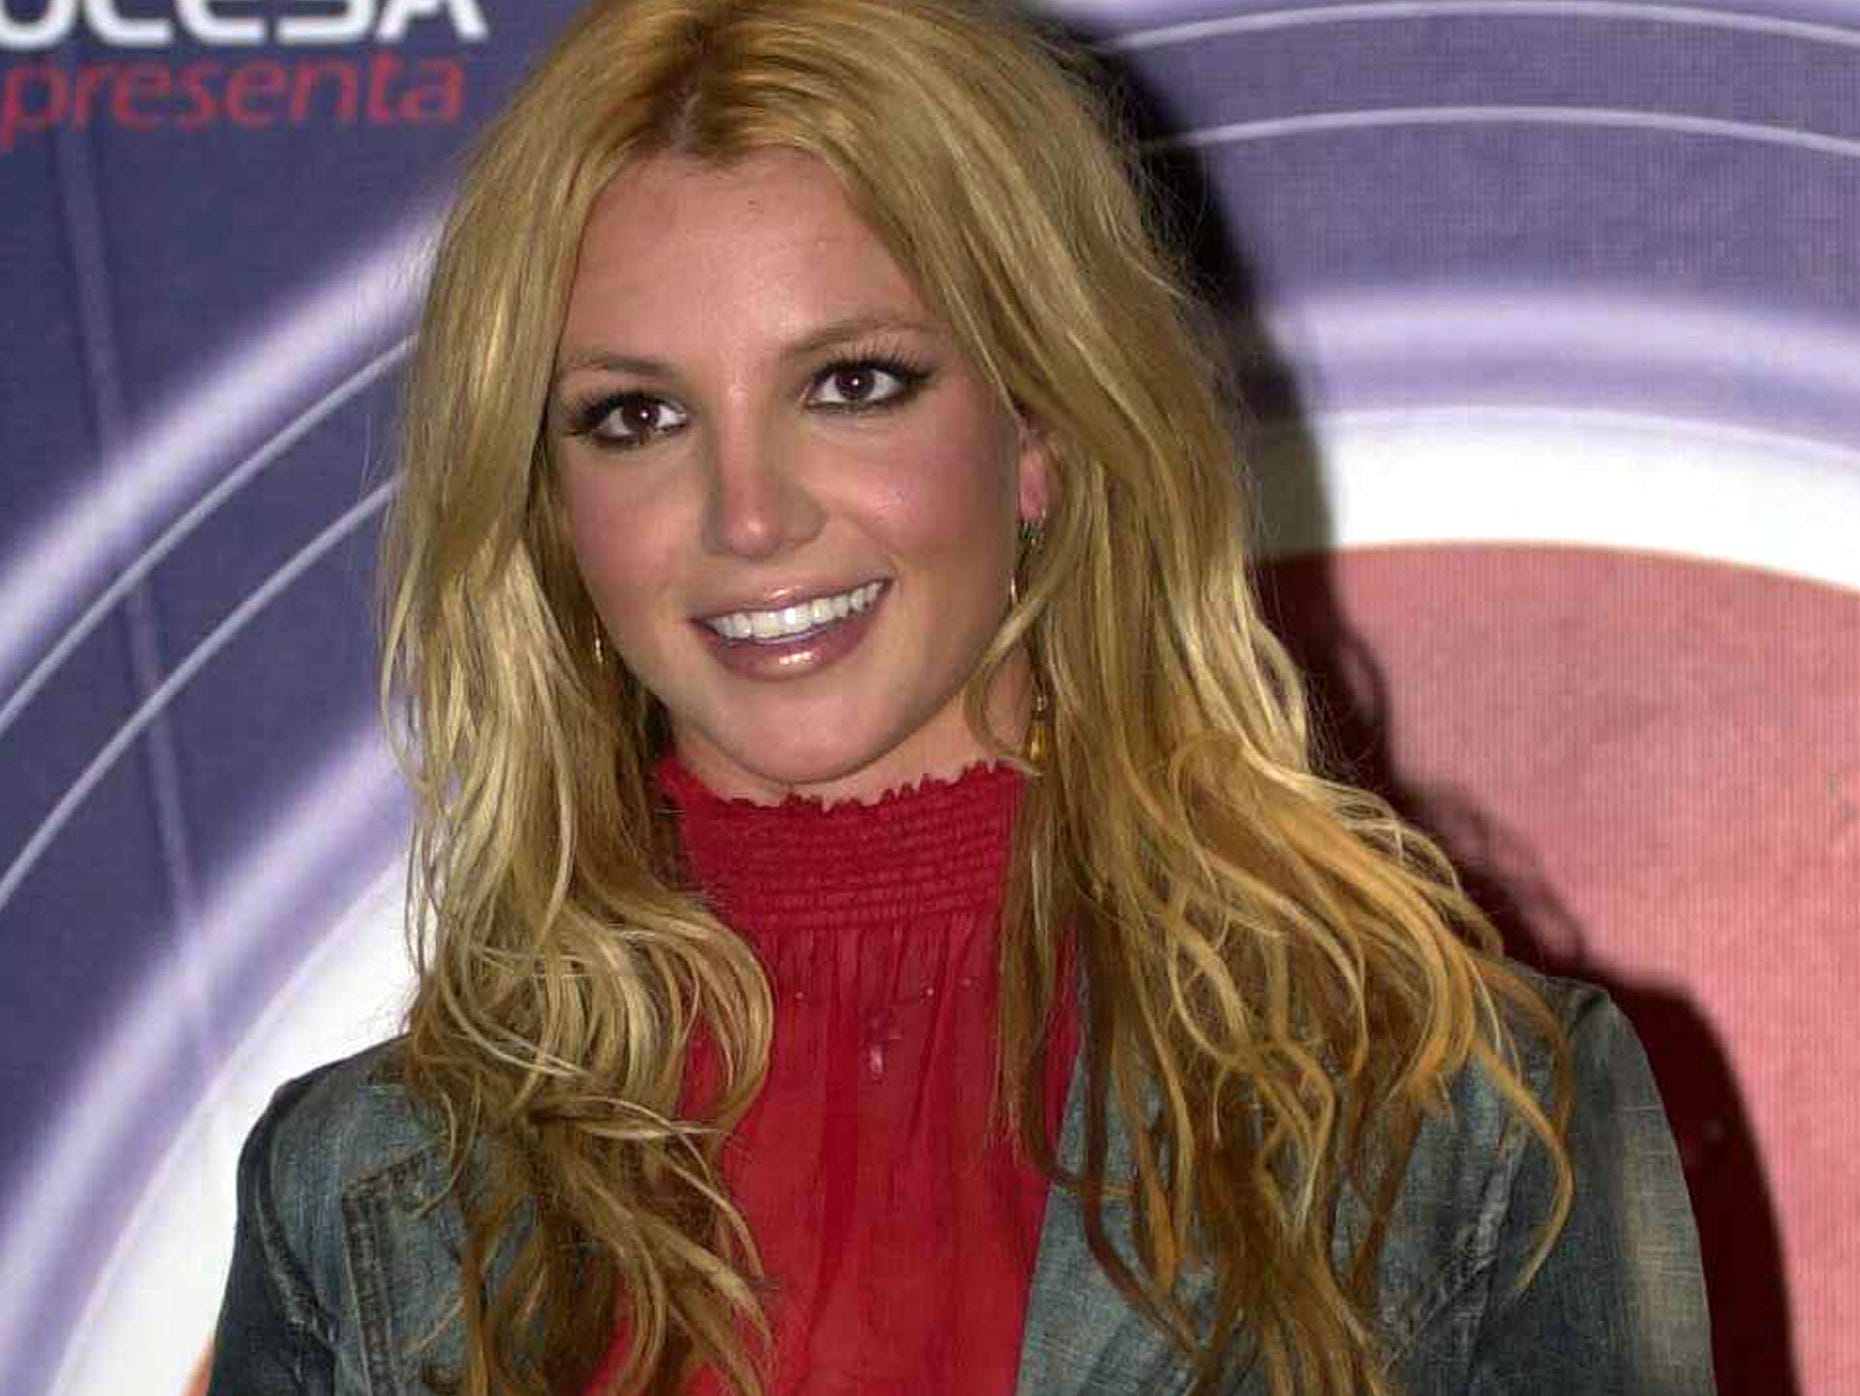 Britney Spears news conference in Mexico City 2002 Susana Gonzalez Getty